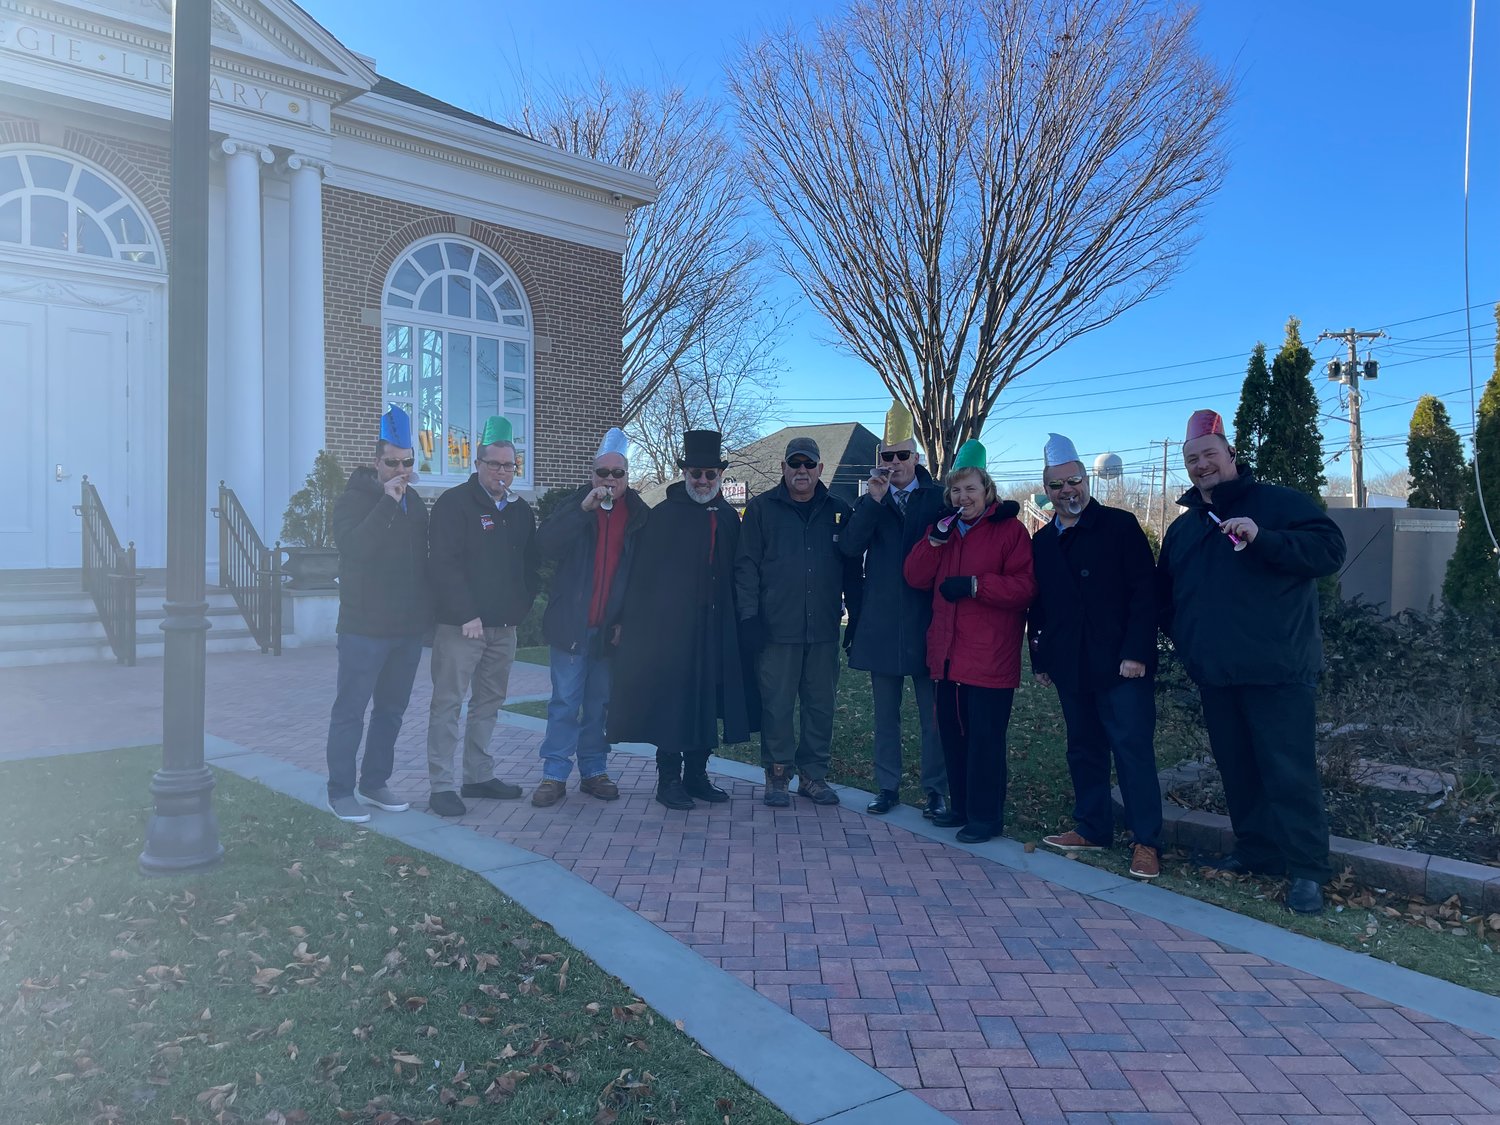 Pictured in front of the Carnegie Library at the intersection where the ball is set to rise on Main Street are the organizers of the event from left to right: Mike Cirigliano, Scott Cooper, Bill Hilton, Brian McAuliff, Al Puig, Gerry Crean, Lori Belmonte, David Kennedy, and Phil Fogarty.